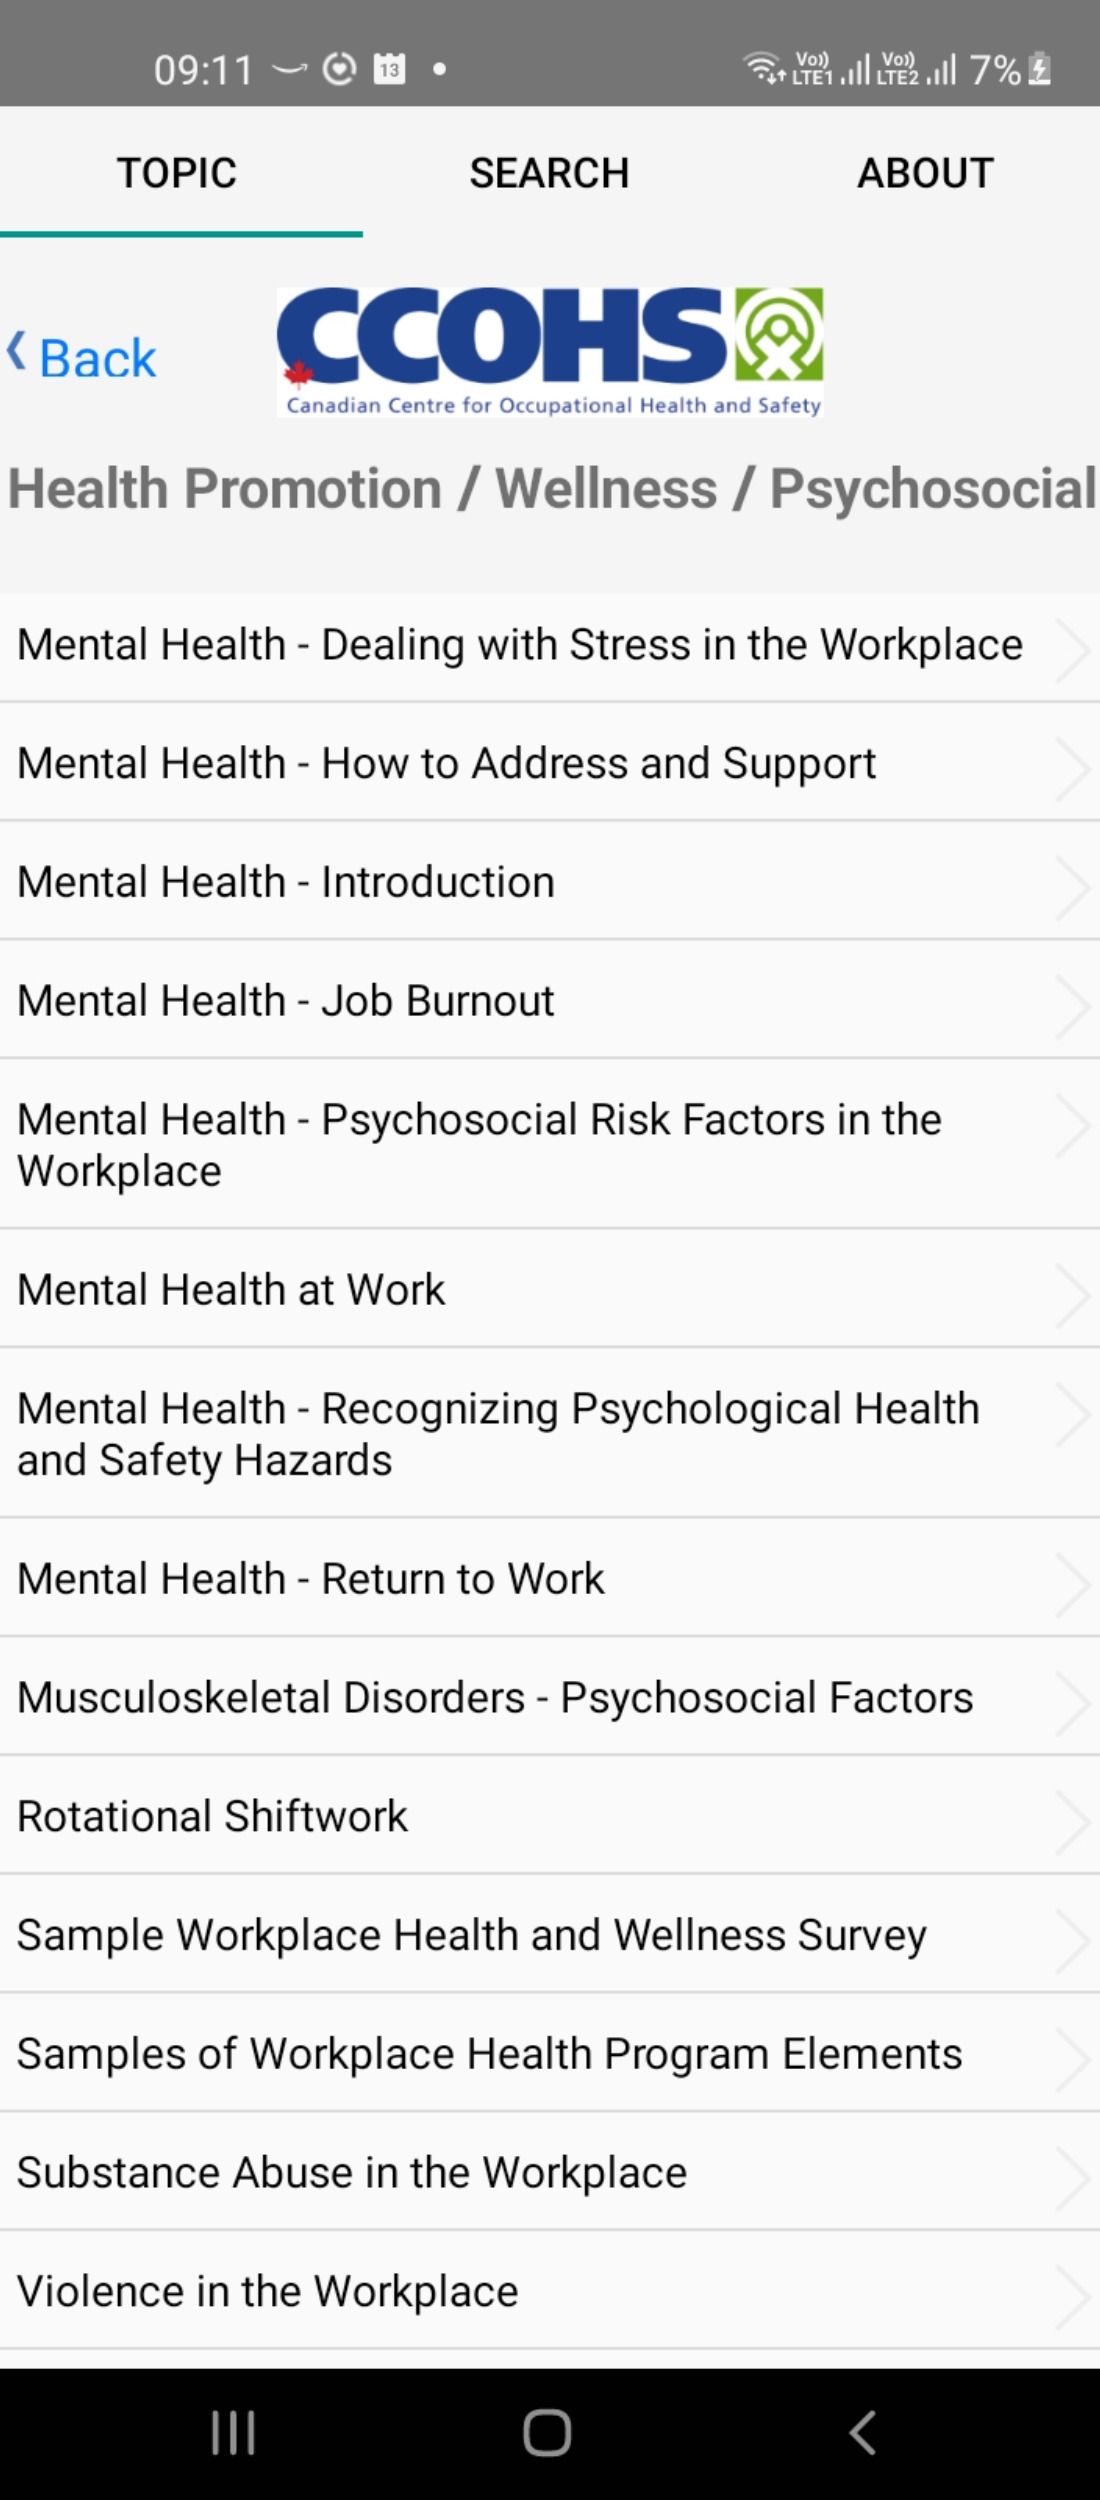 Health and wellness resources in the OHS Answers app